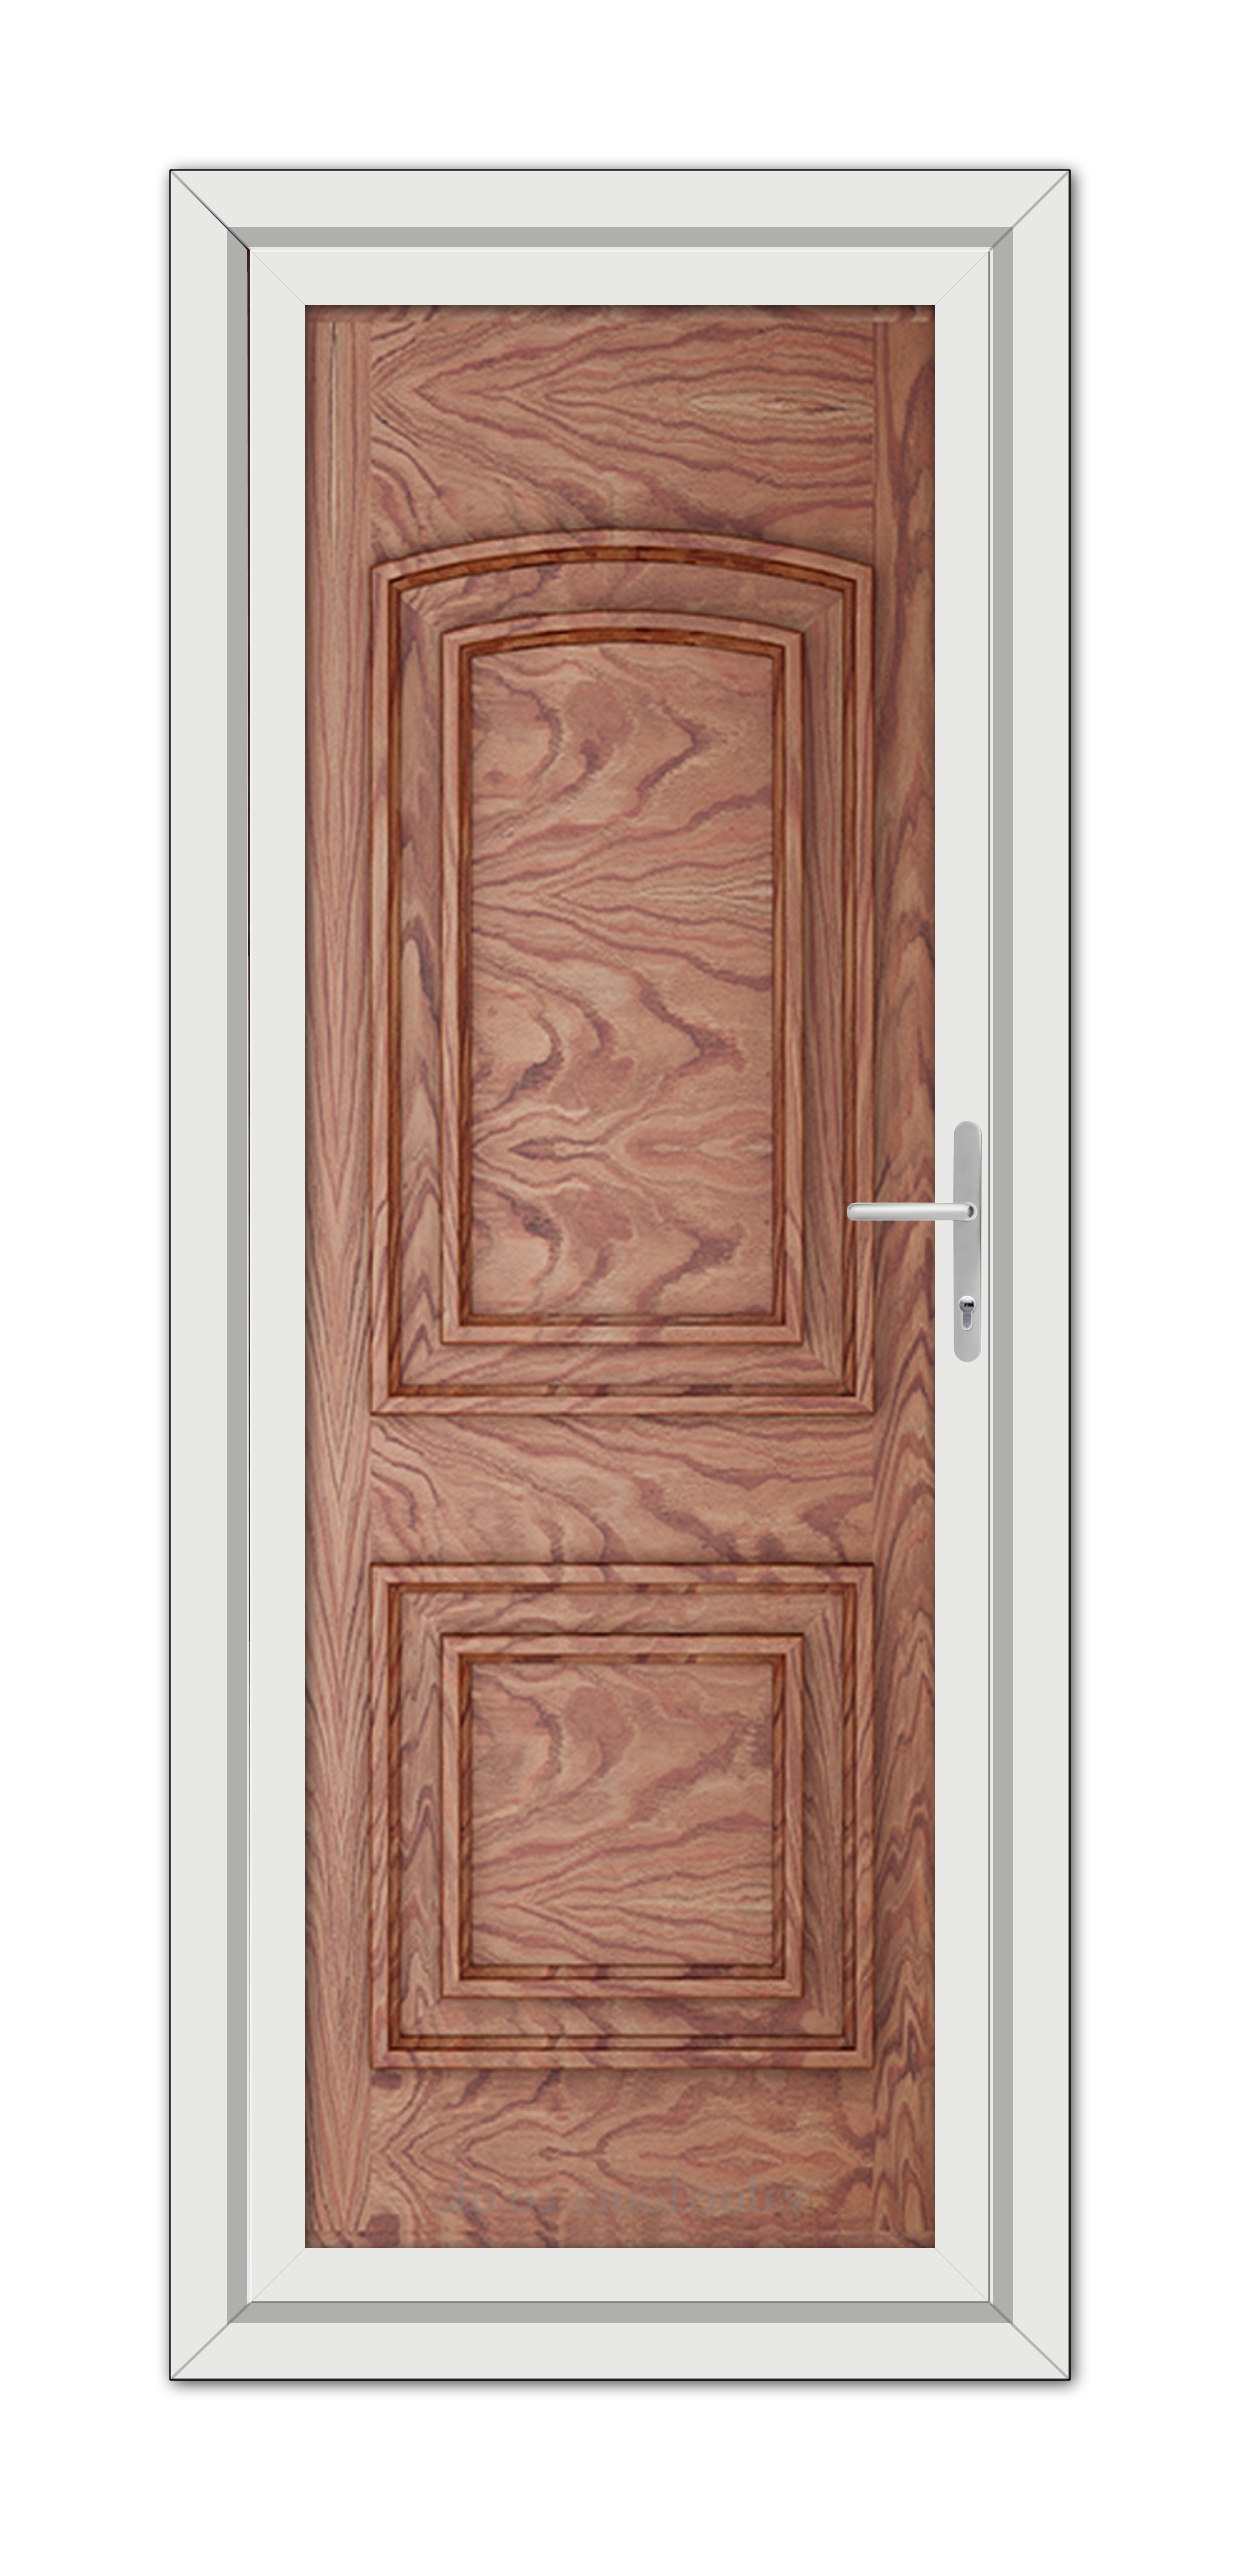 A Solid Oak Balmoral solid uPVC door with intricate grain patterns, featuring two recessed panels, set within a white door frame with a modern metal handle.